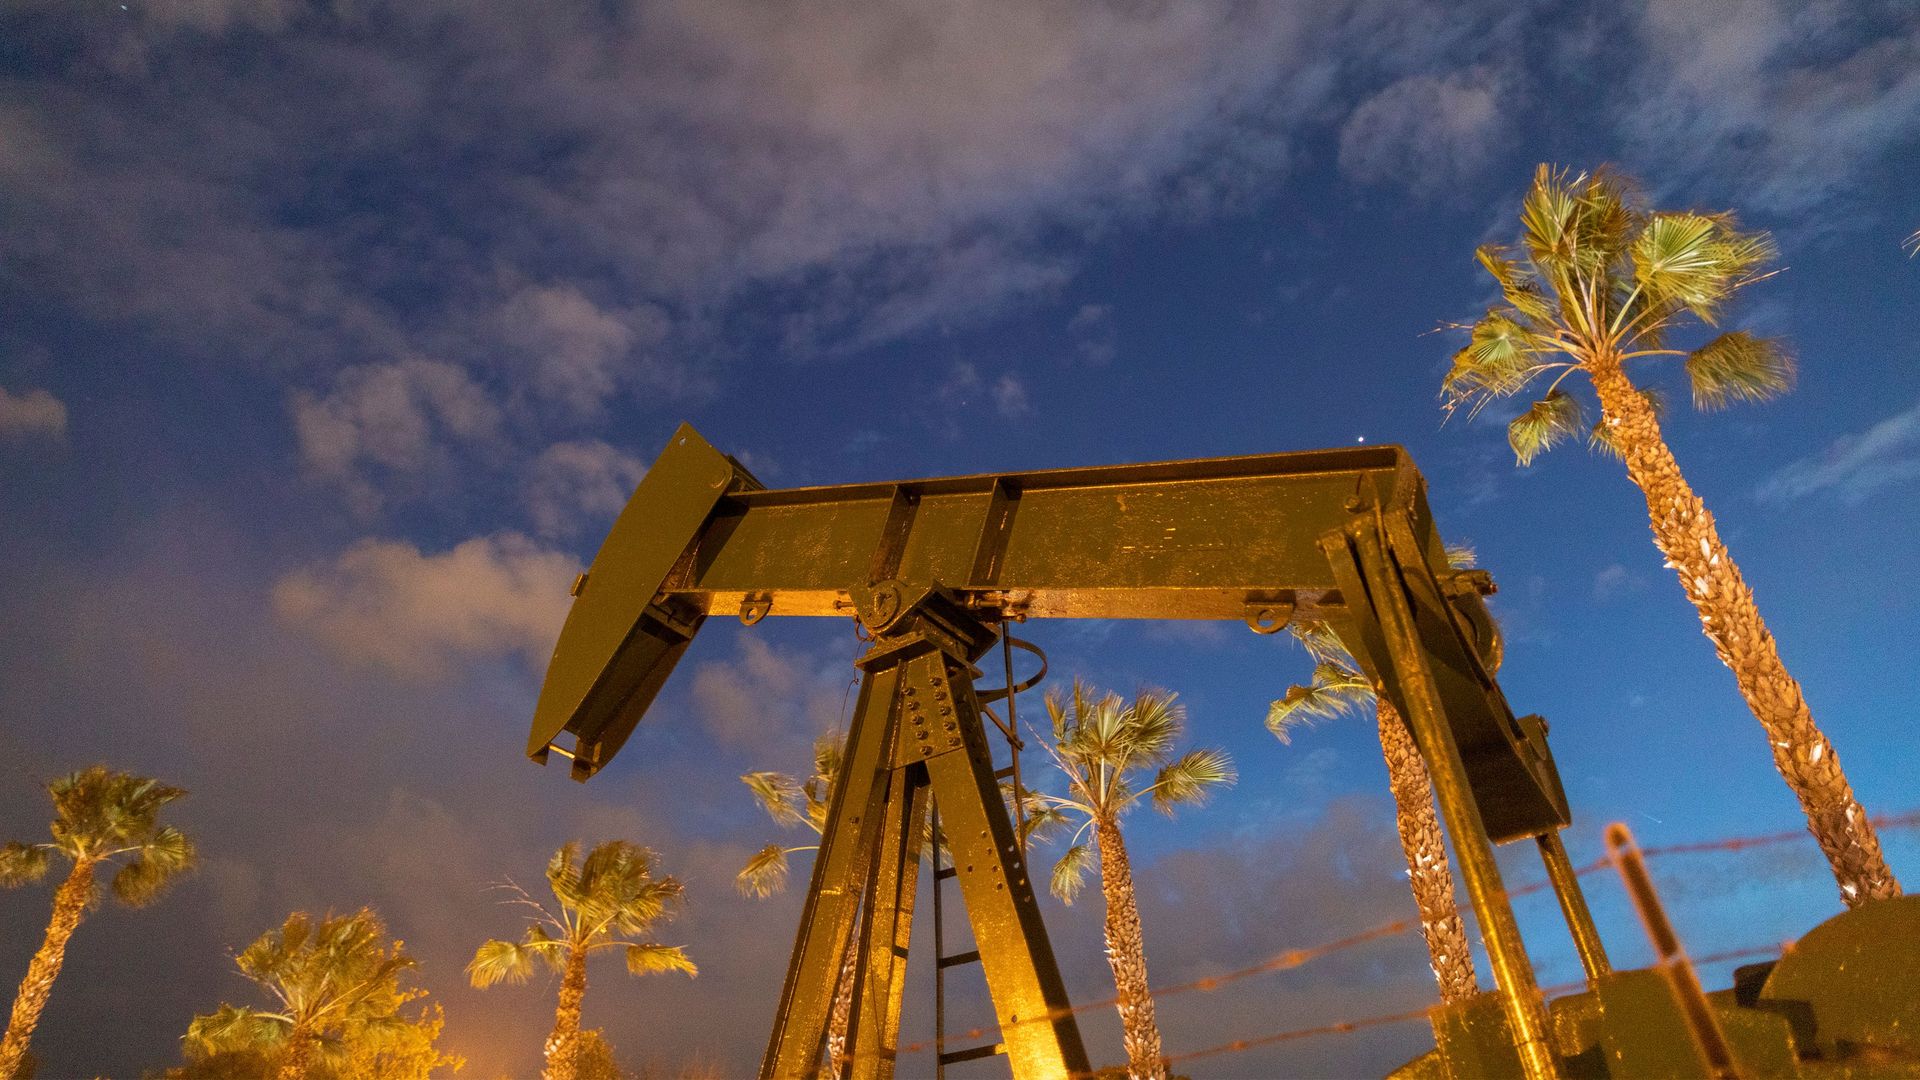 Pump jacks draw crude oil from the Long Beach Oil Field under Discovery Well Park in Signal Hill, California, on March 9